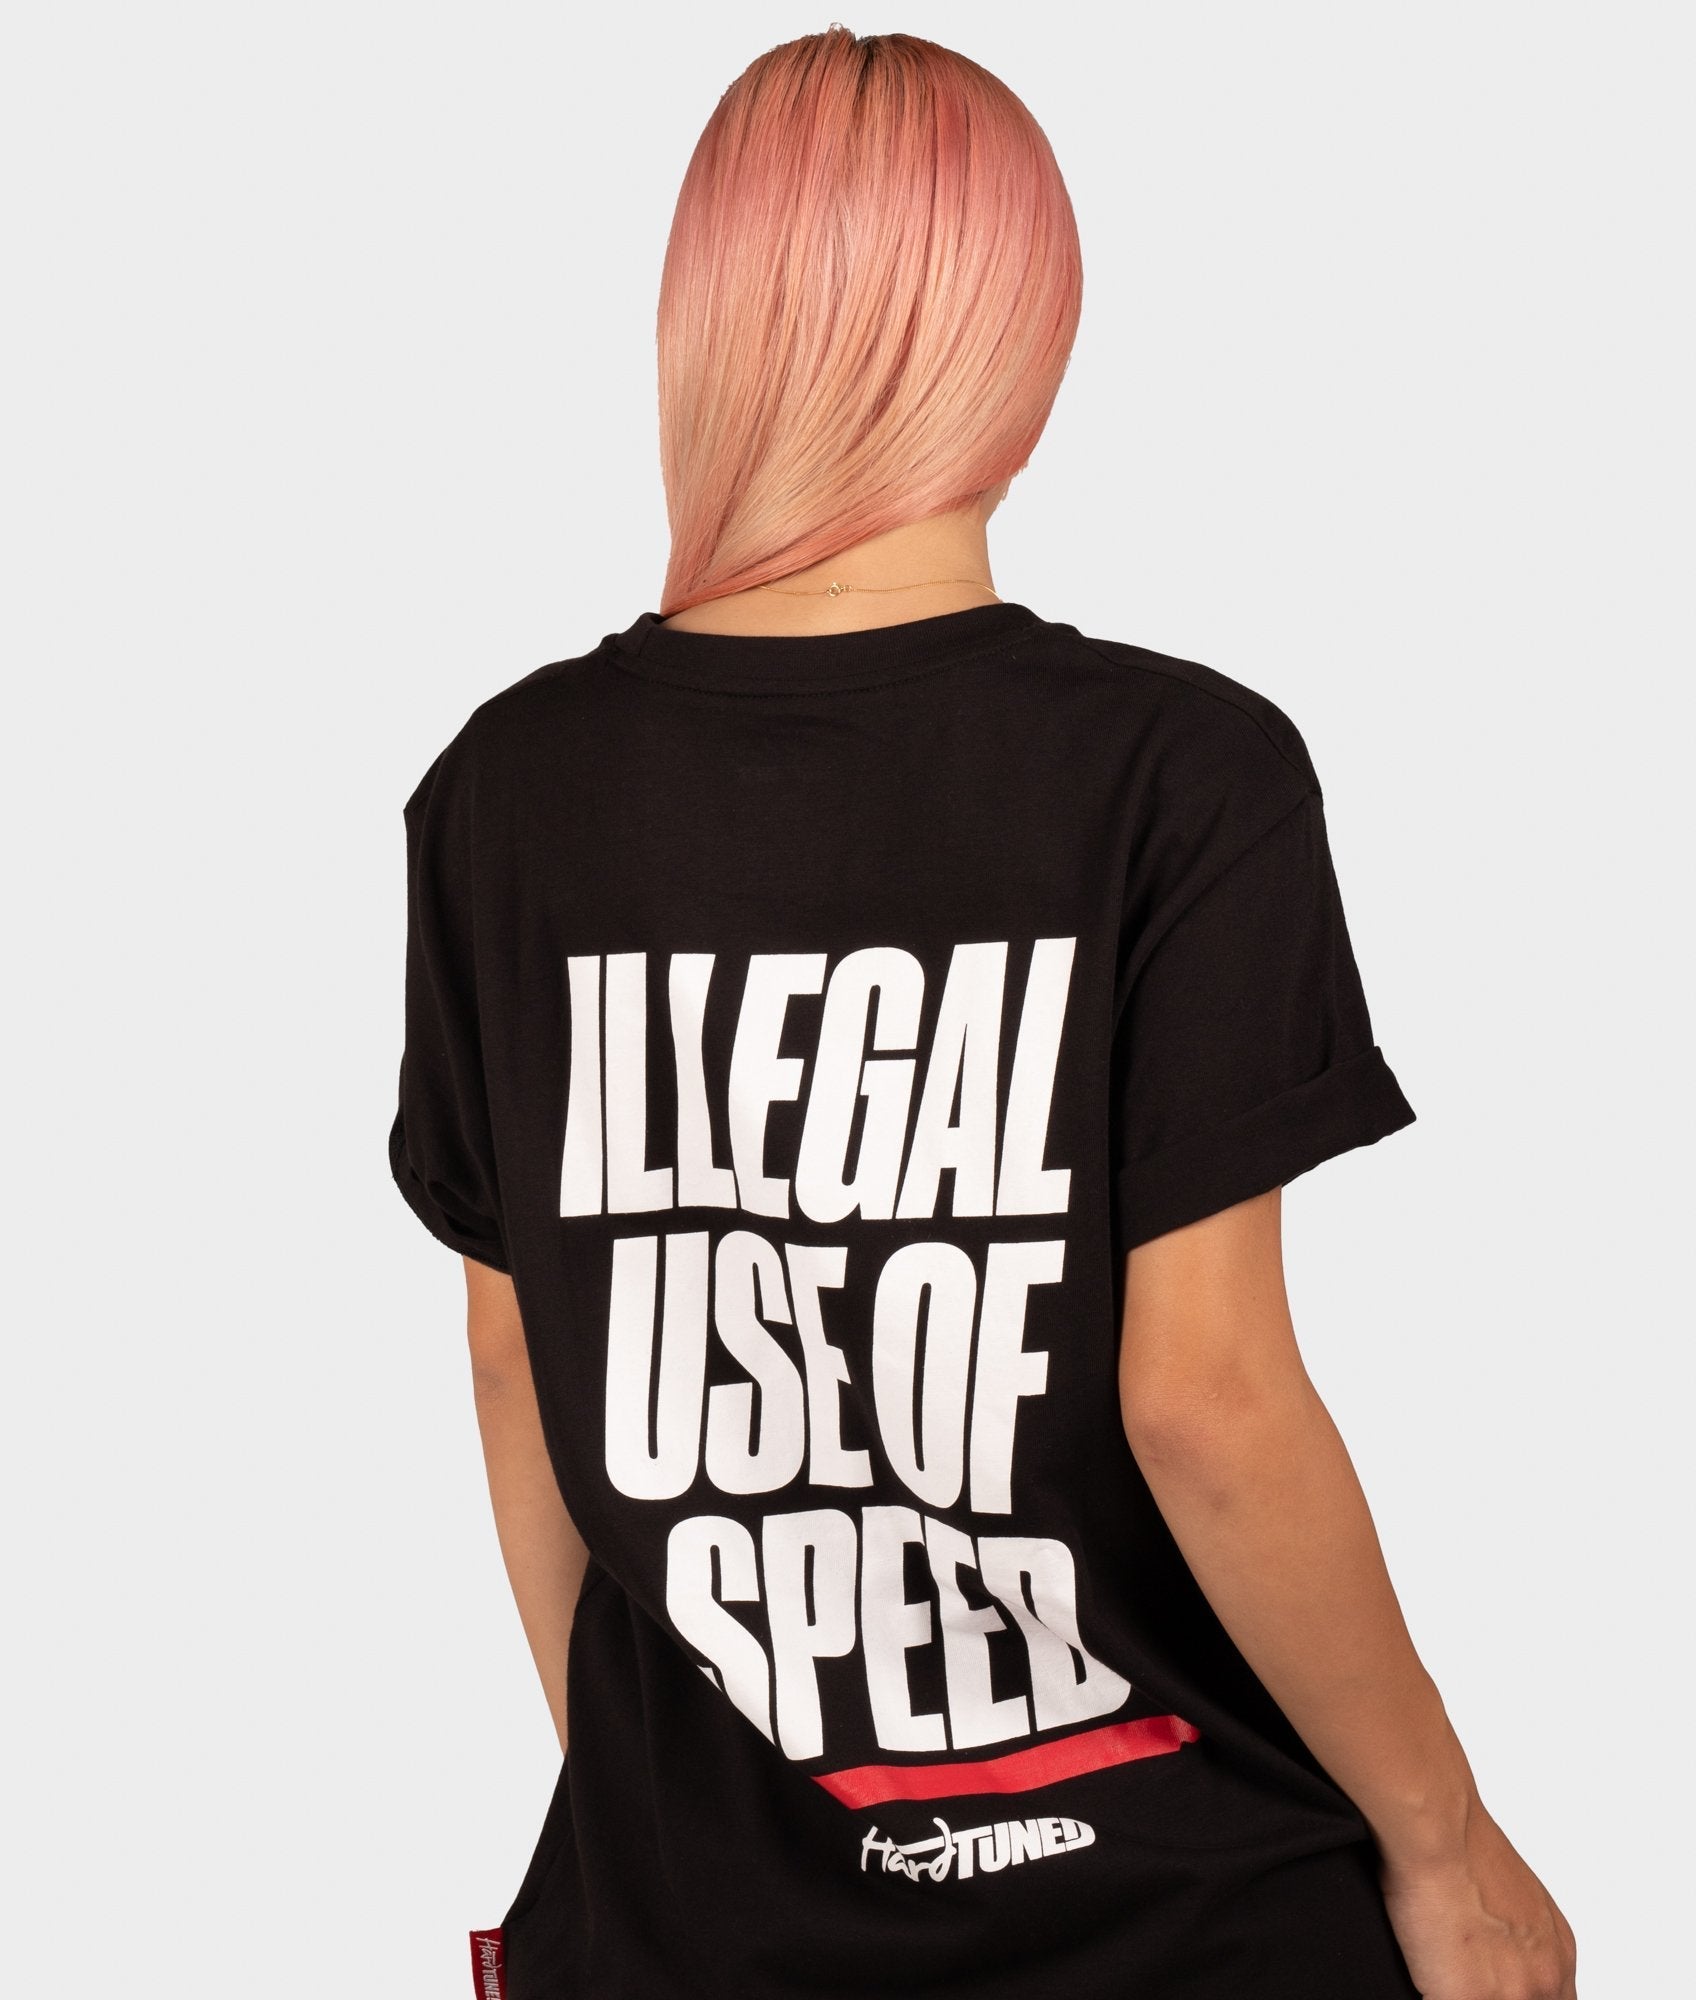 Illegal Use Of Speed Womens Tee - Hardtuned